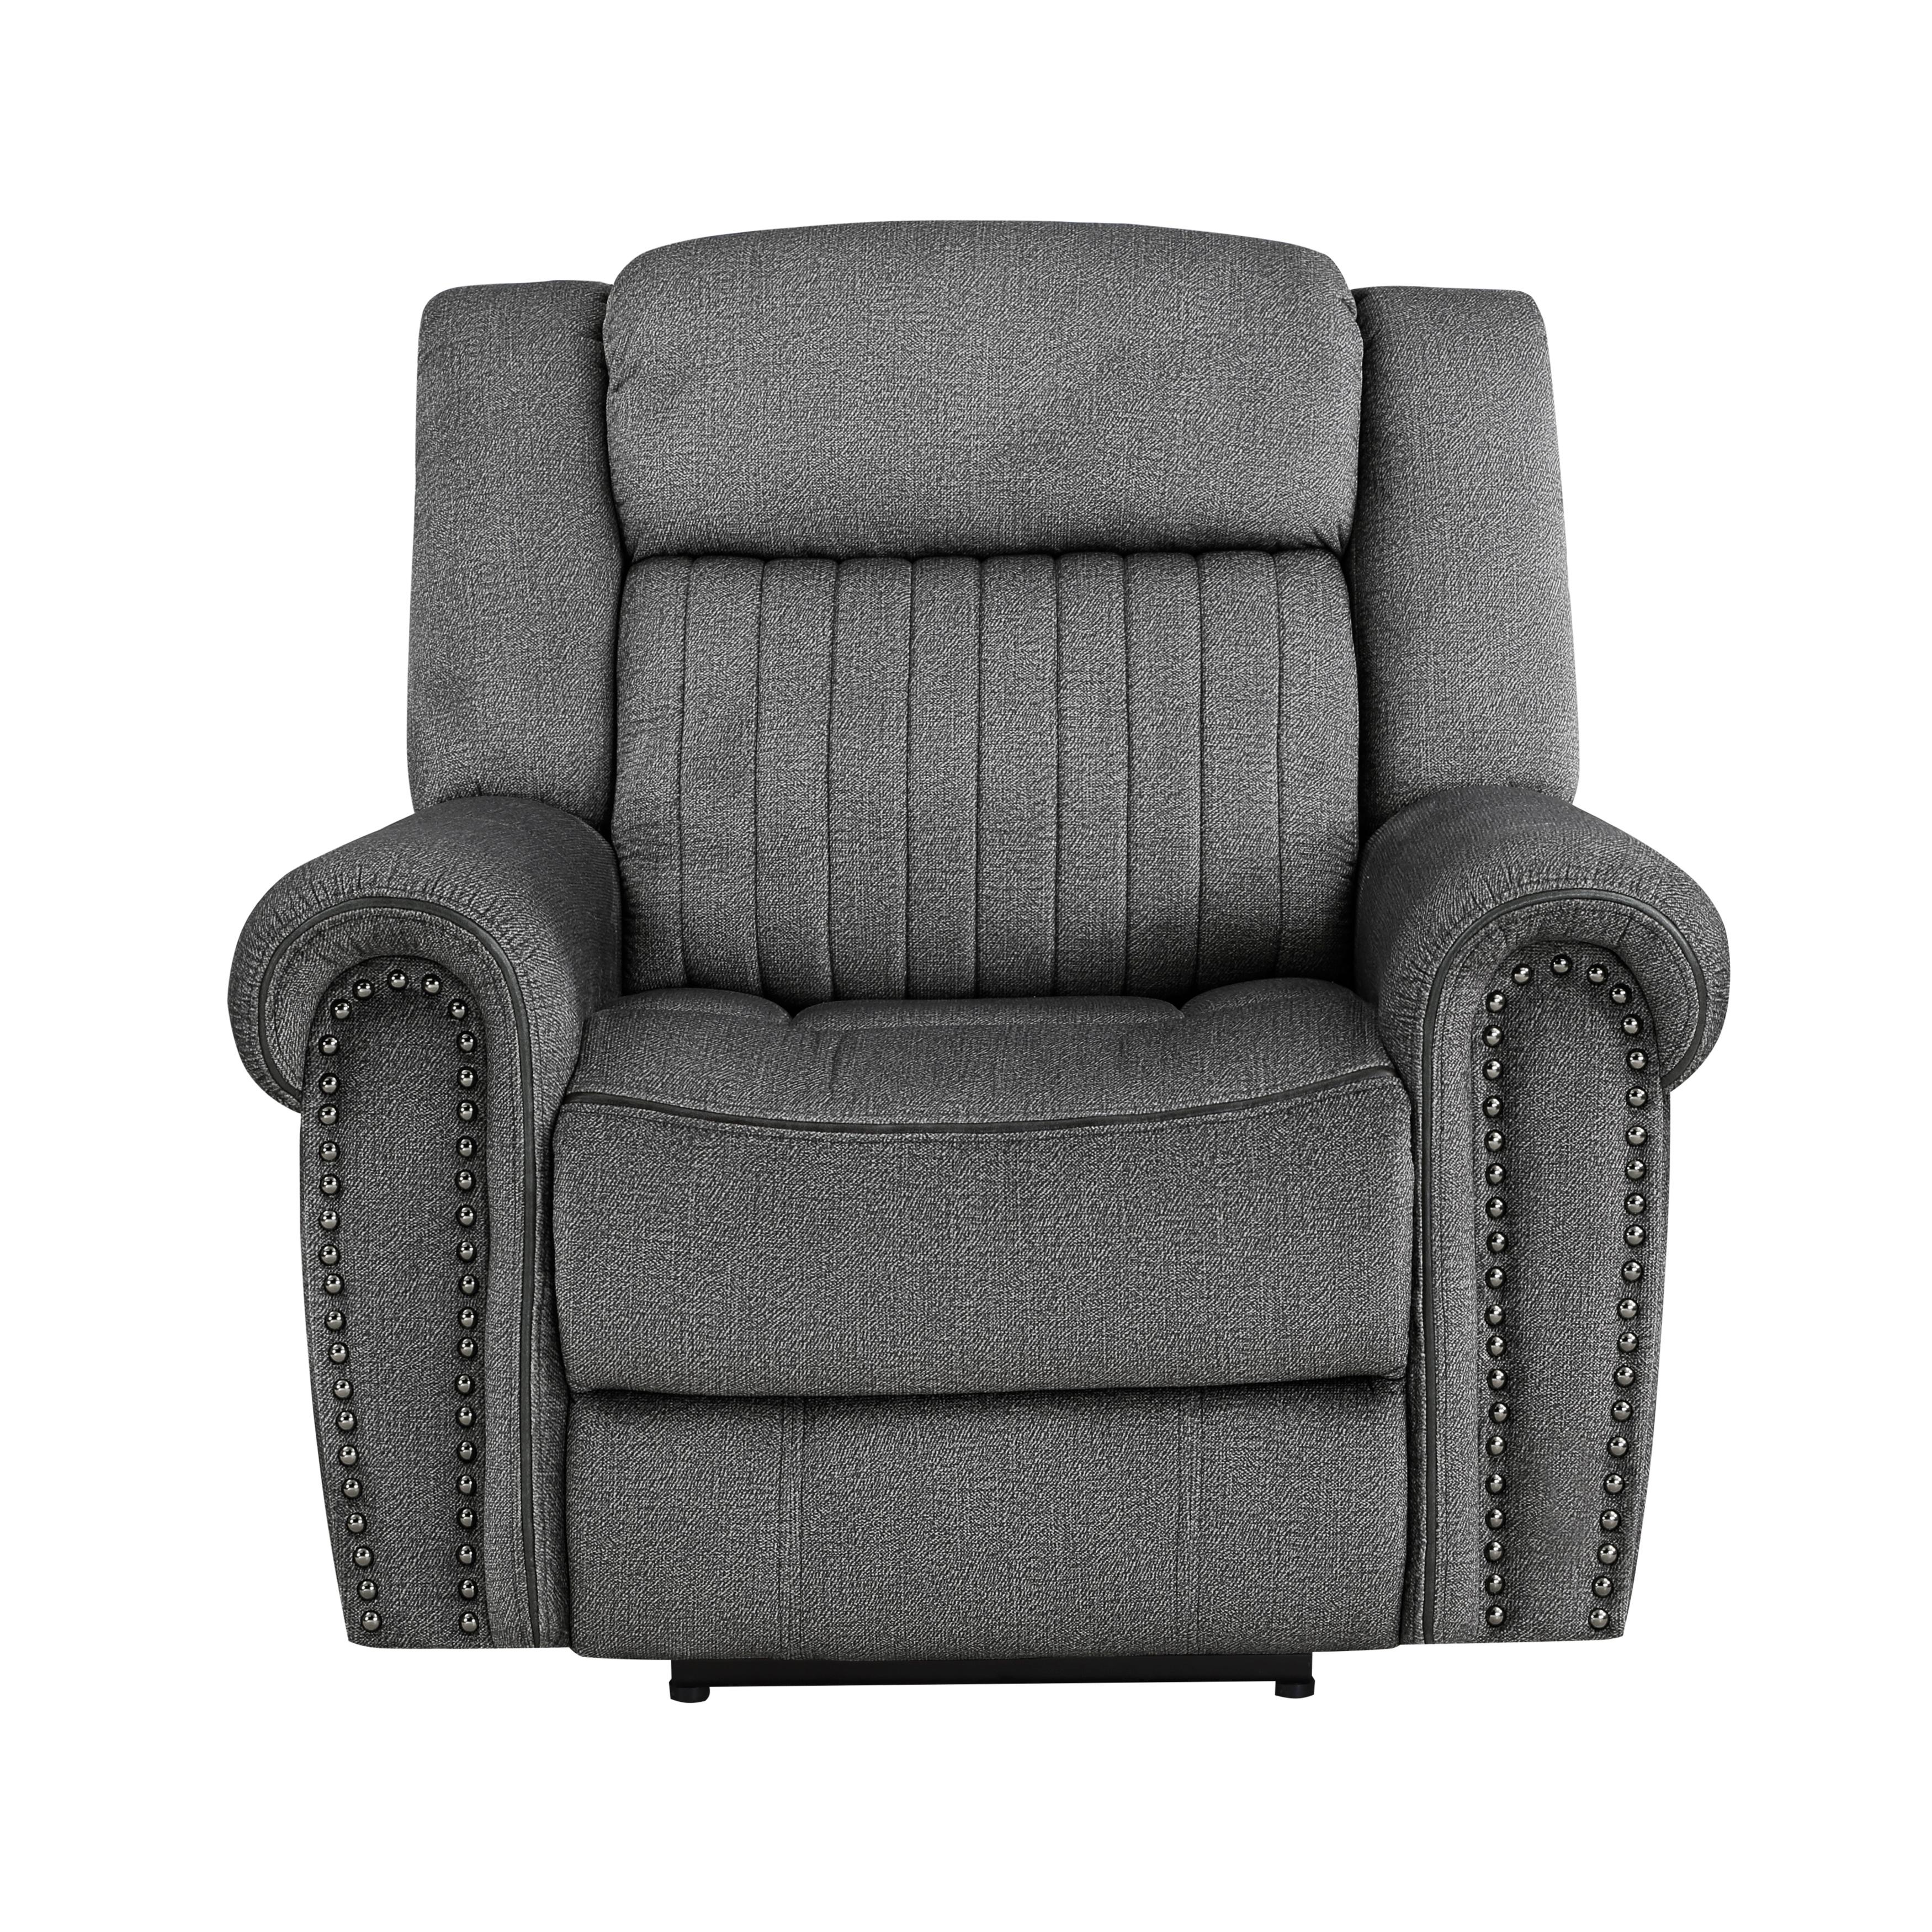 Transitional Power Reclining Chair 9204CC-1PW Brennen 9204CC-1PW in Charcoal Microfiber